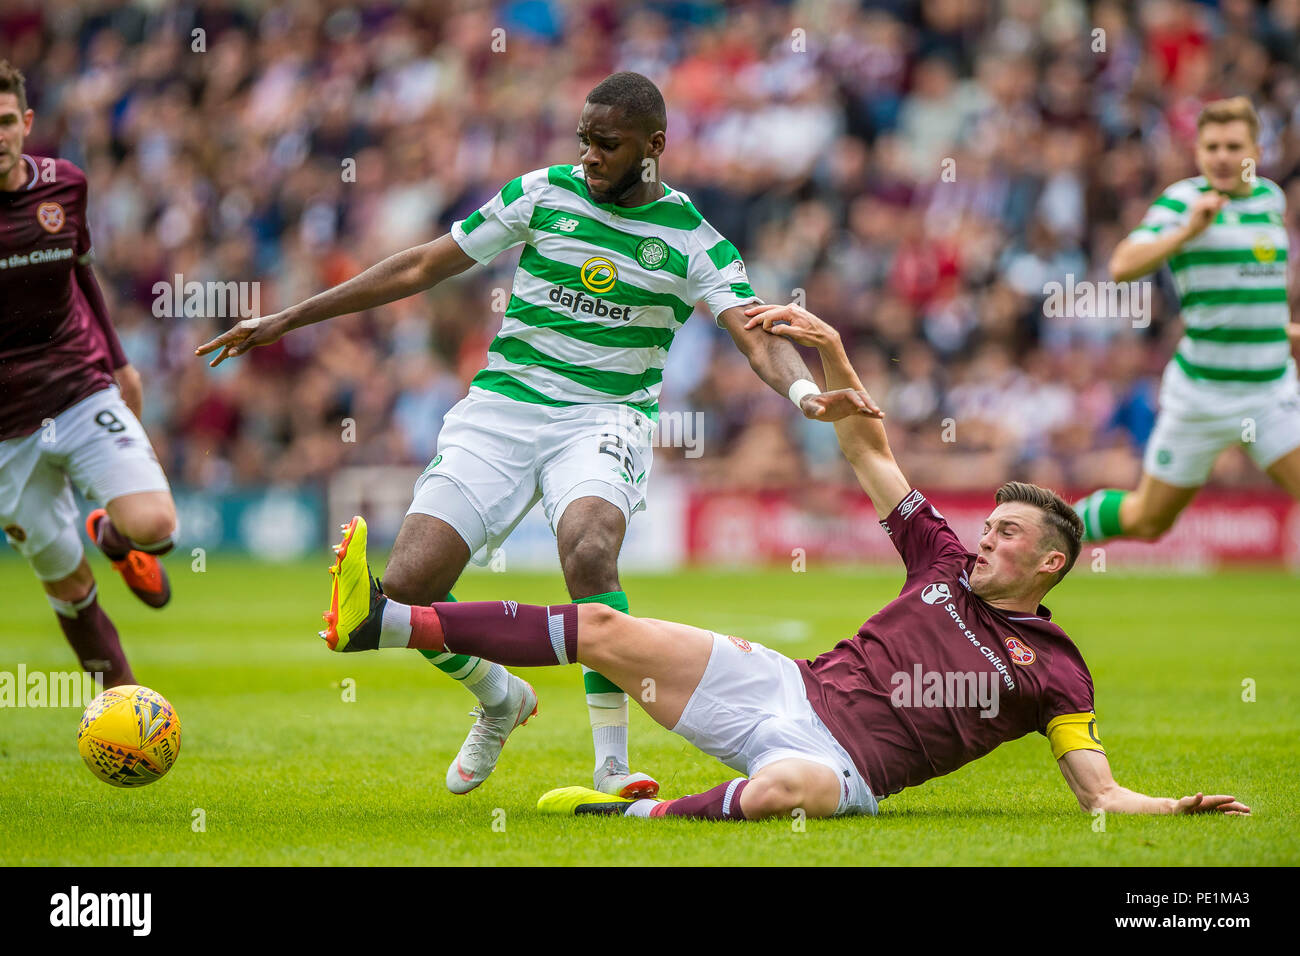 Celtic's Odsonne Edouard and Hearts' John Souttar compete for the ball during the Ladbrokes Scottish Premiership match at Tynecastle Stadium, Edinburgh. Stock Photo